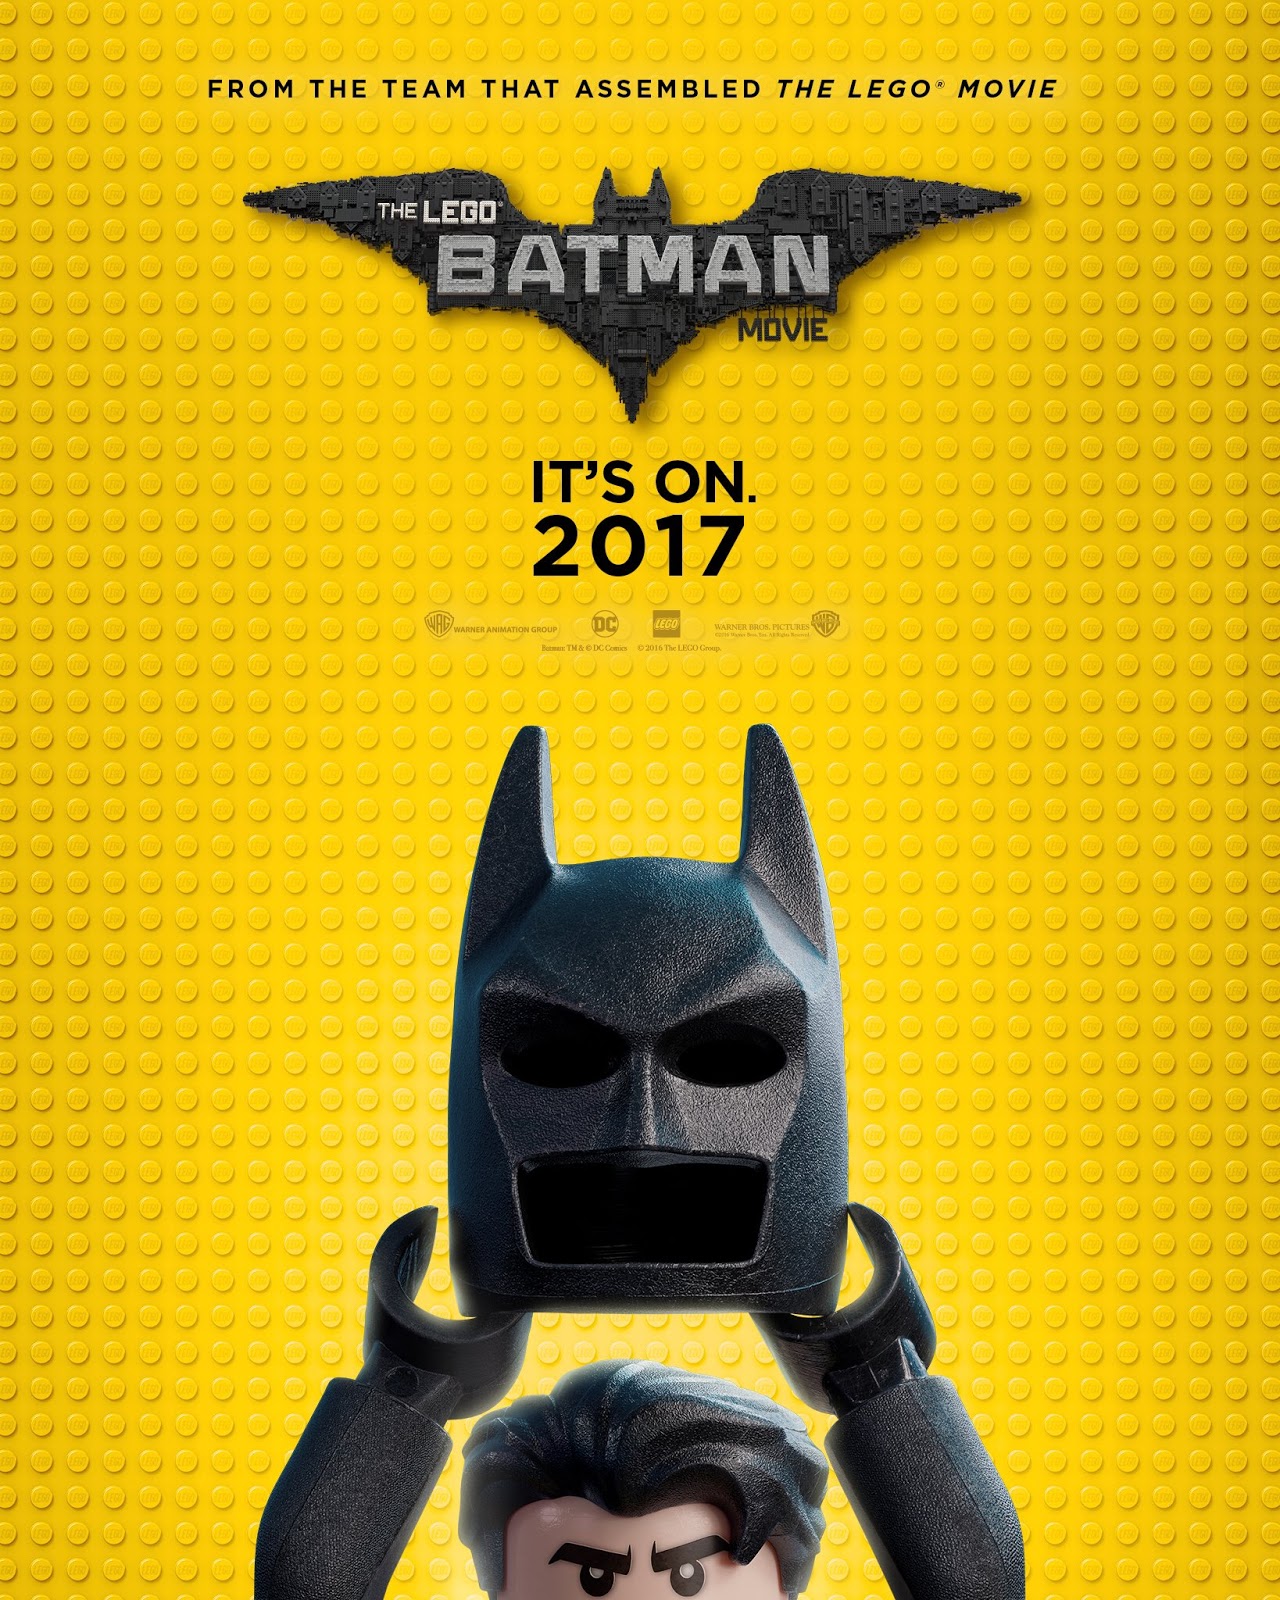 THE LEGO BATMAN MOVIE Poster Released During SDCC 2016